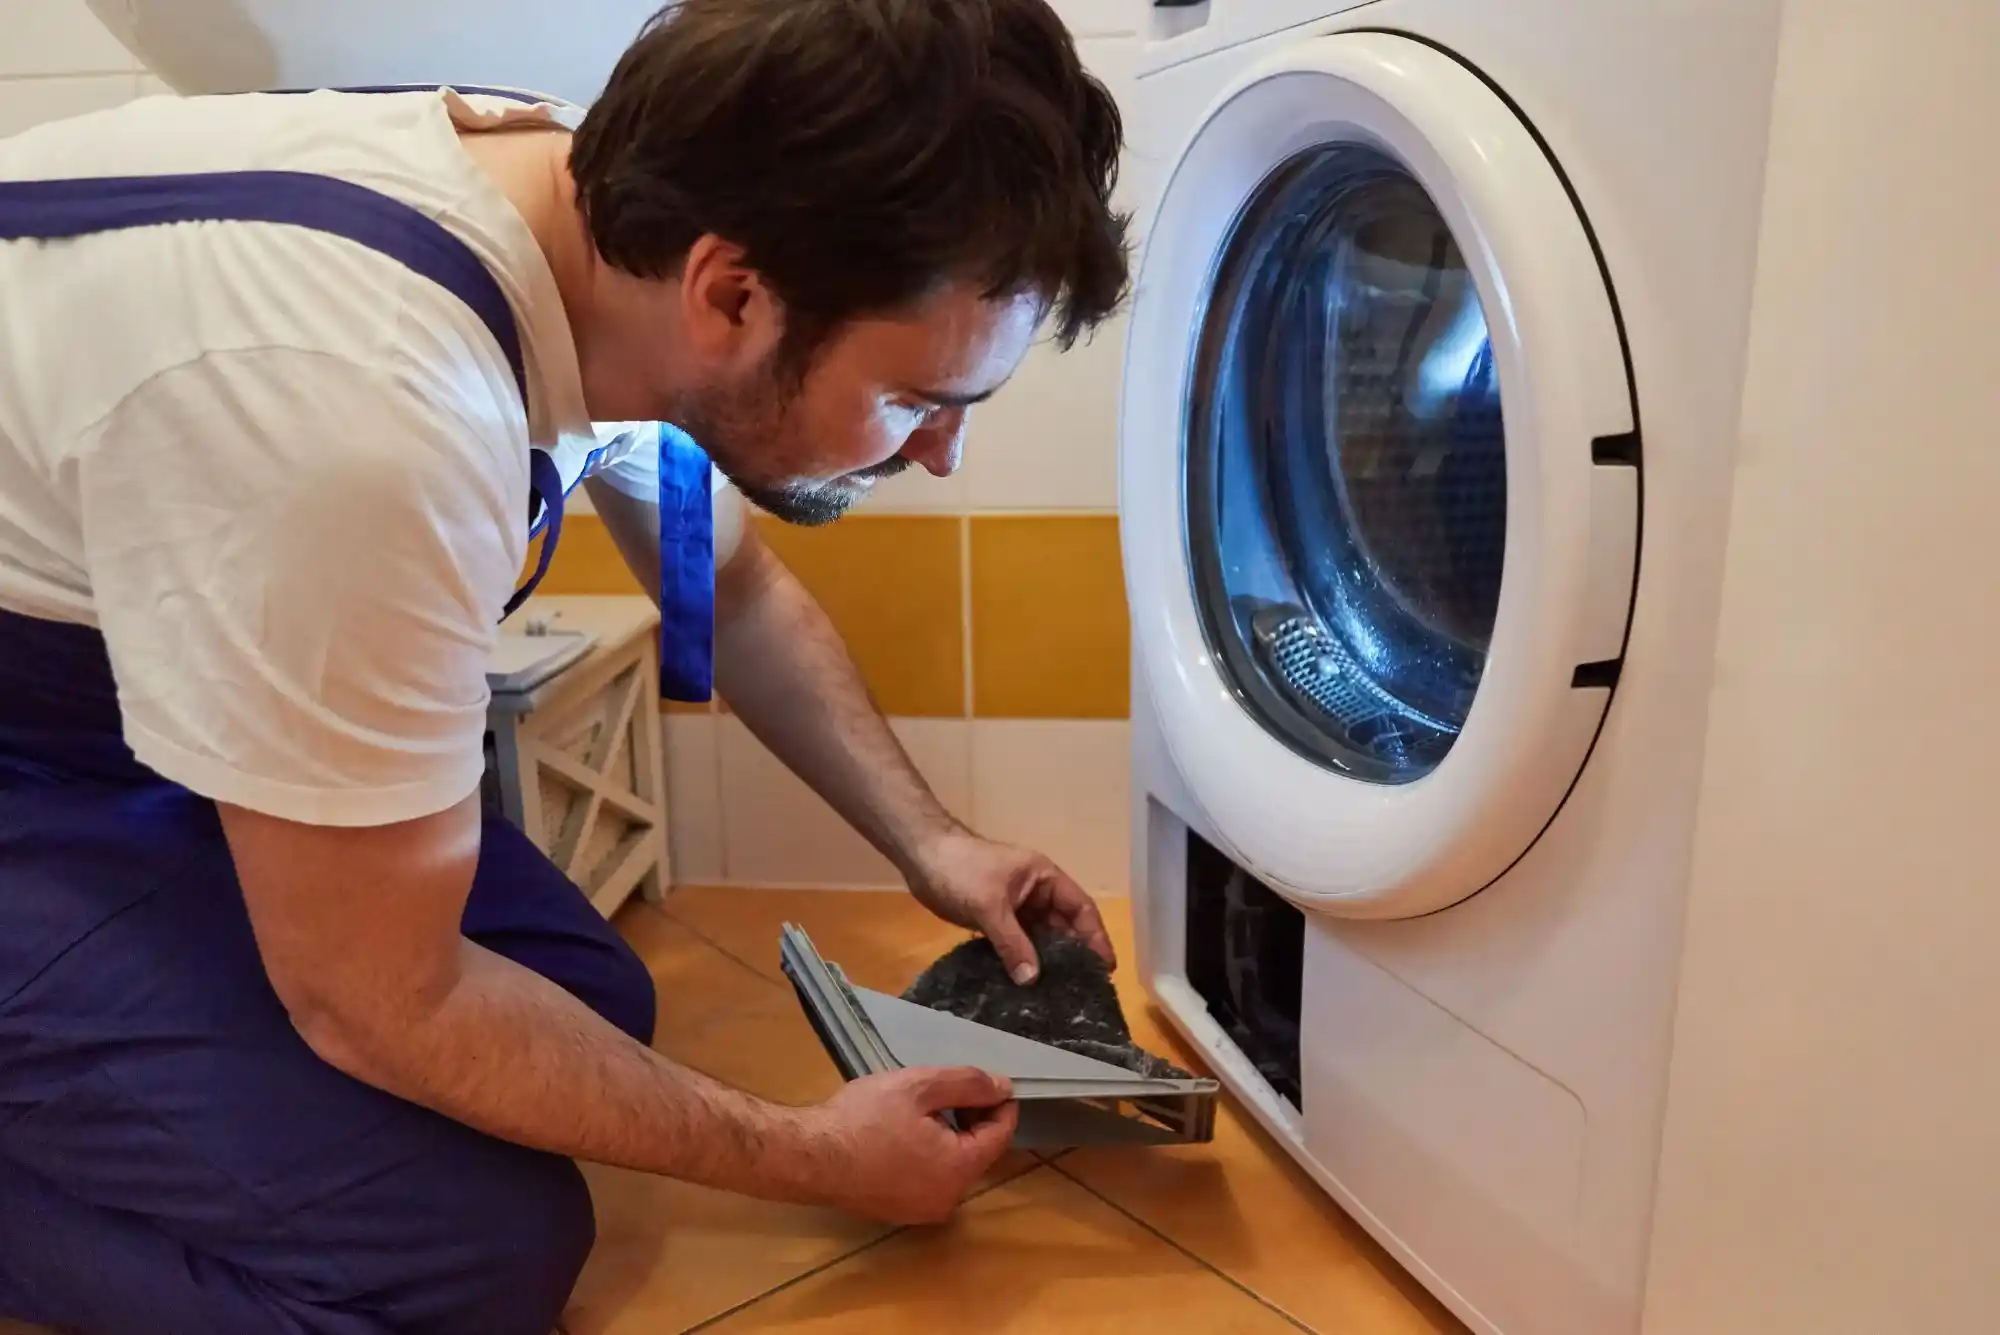 How Can I Locate Dryer Repair Specialists in Dubai?